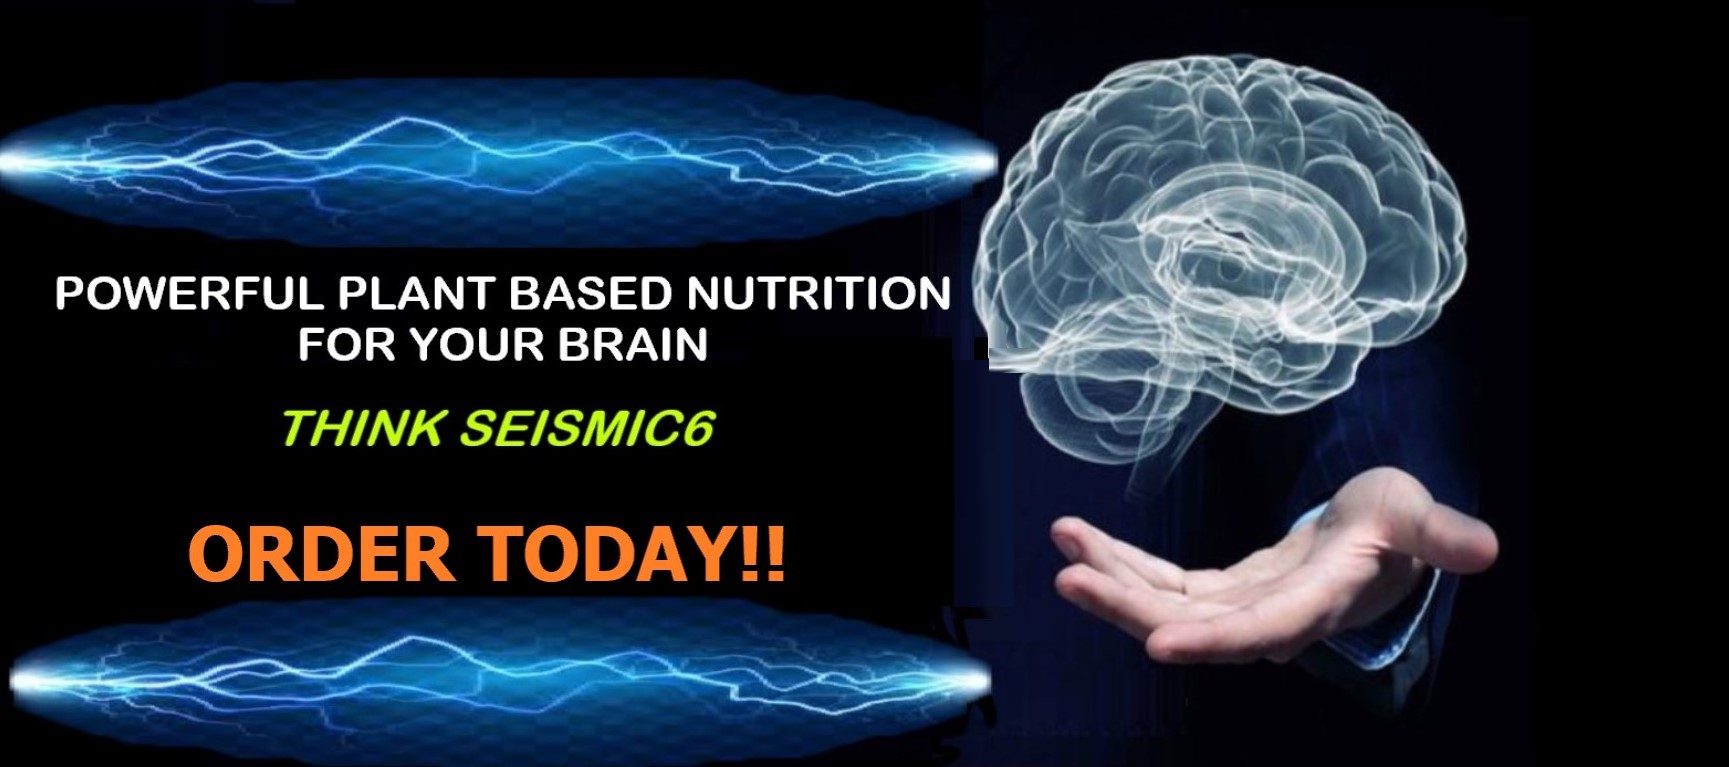 Seismic6 Super Food For Your Brain